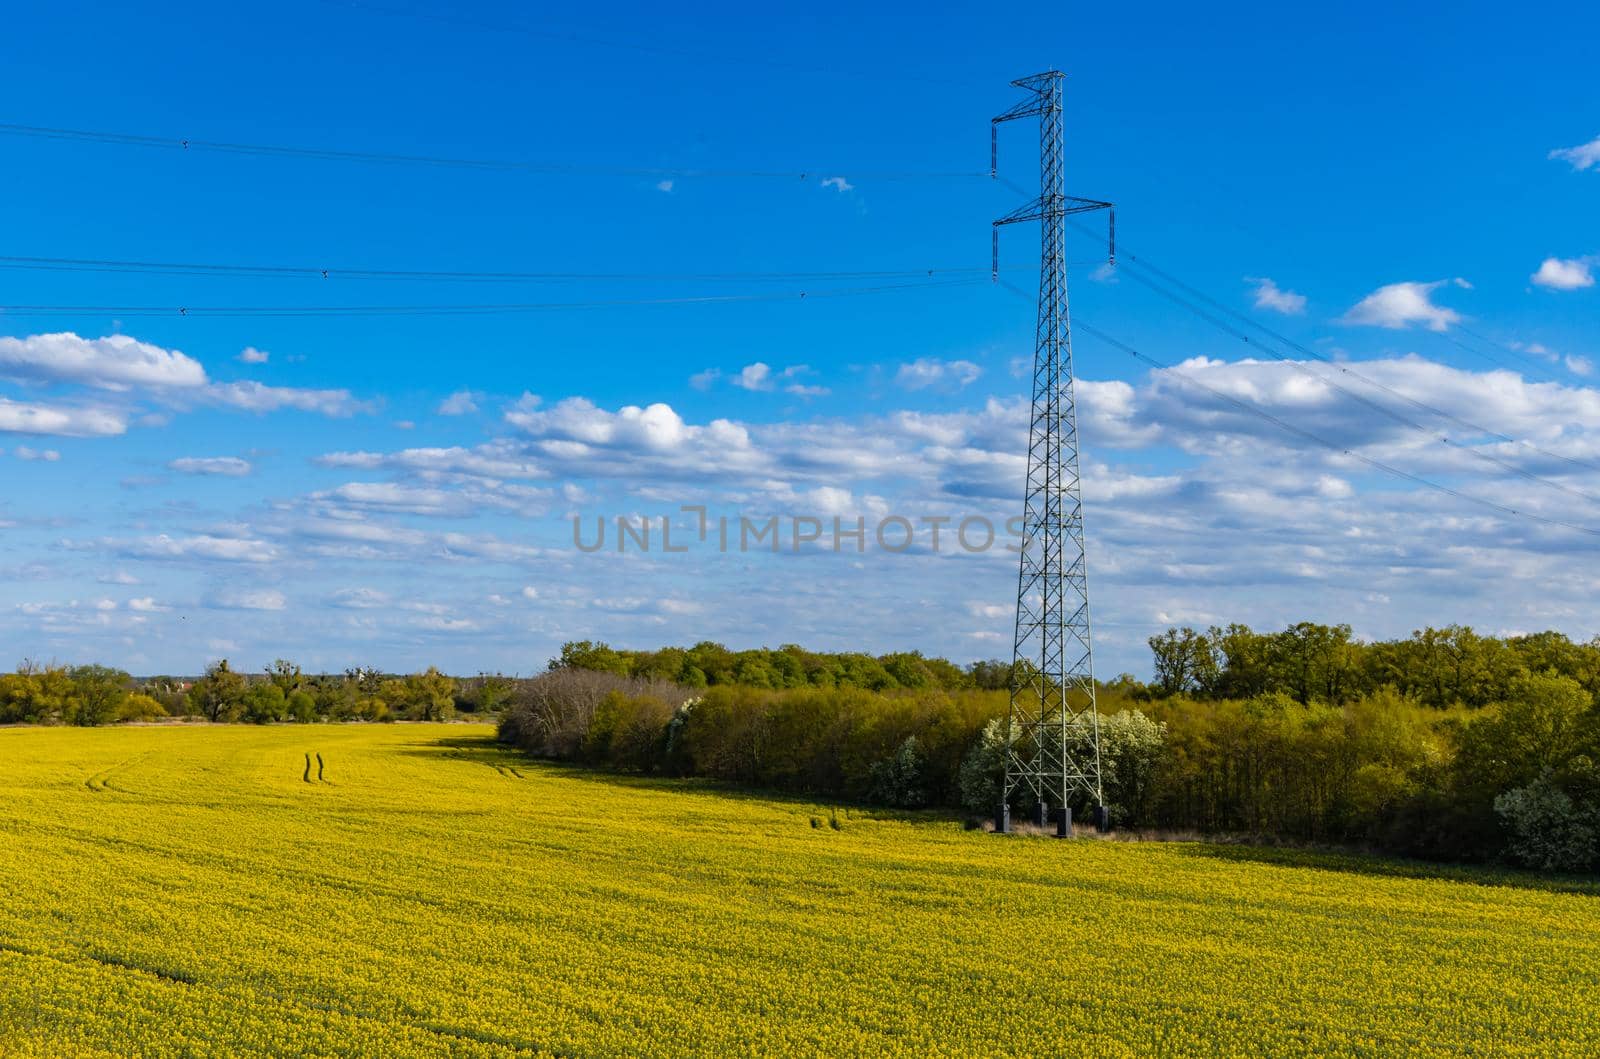 Gigh voltage pole on huge yellow colza field near small forest